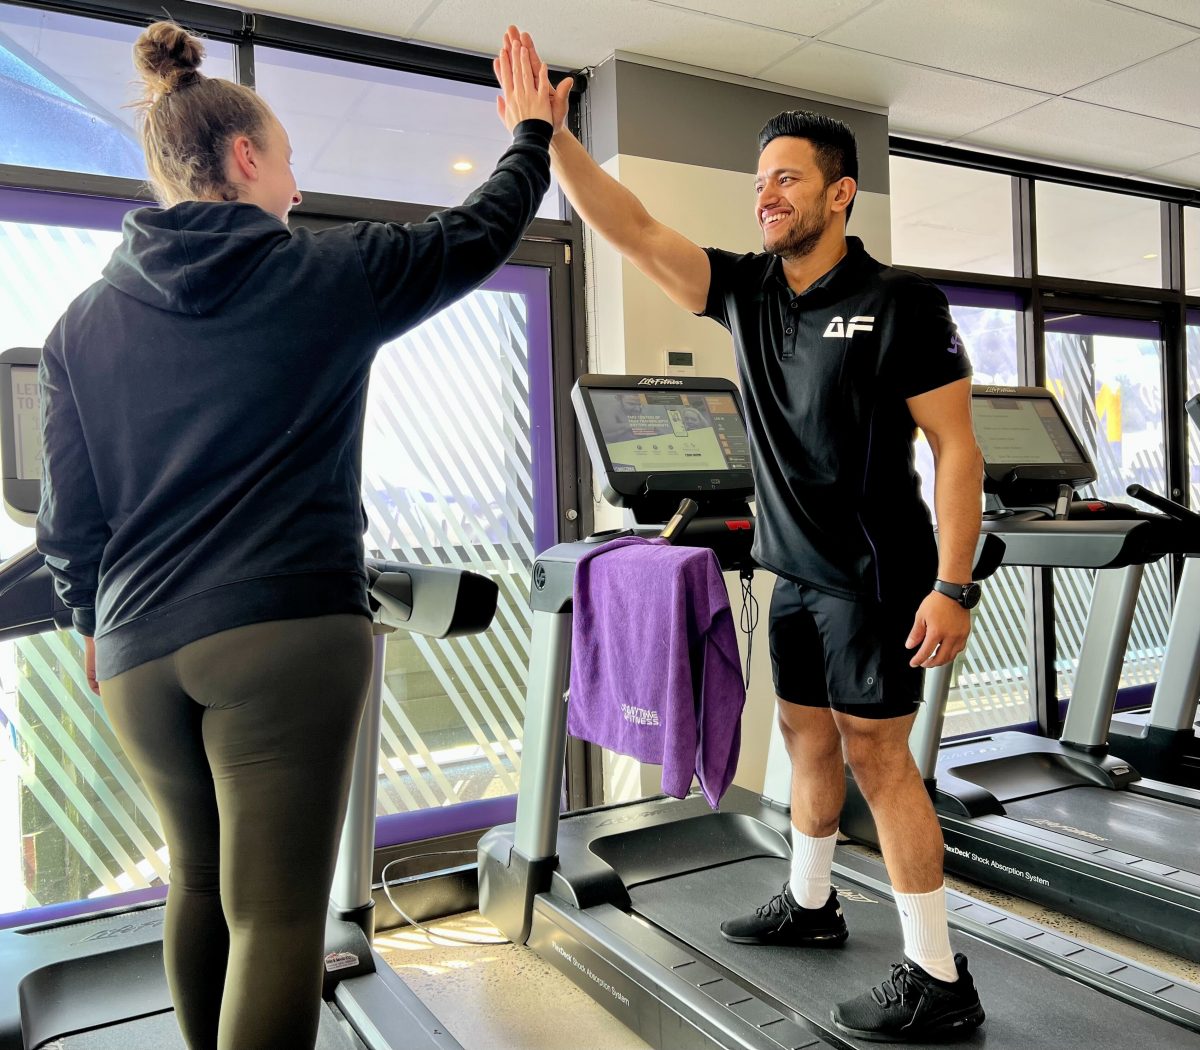 Man on treadmill hi-fiving his personal trainer at an Anytime Fitness gym. 